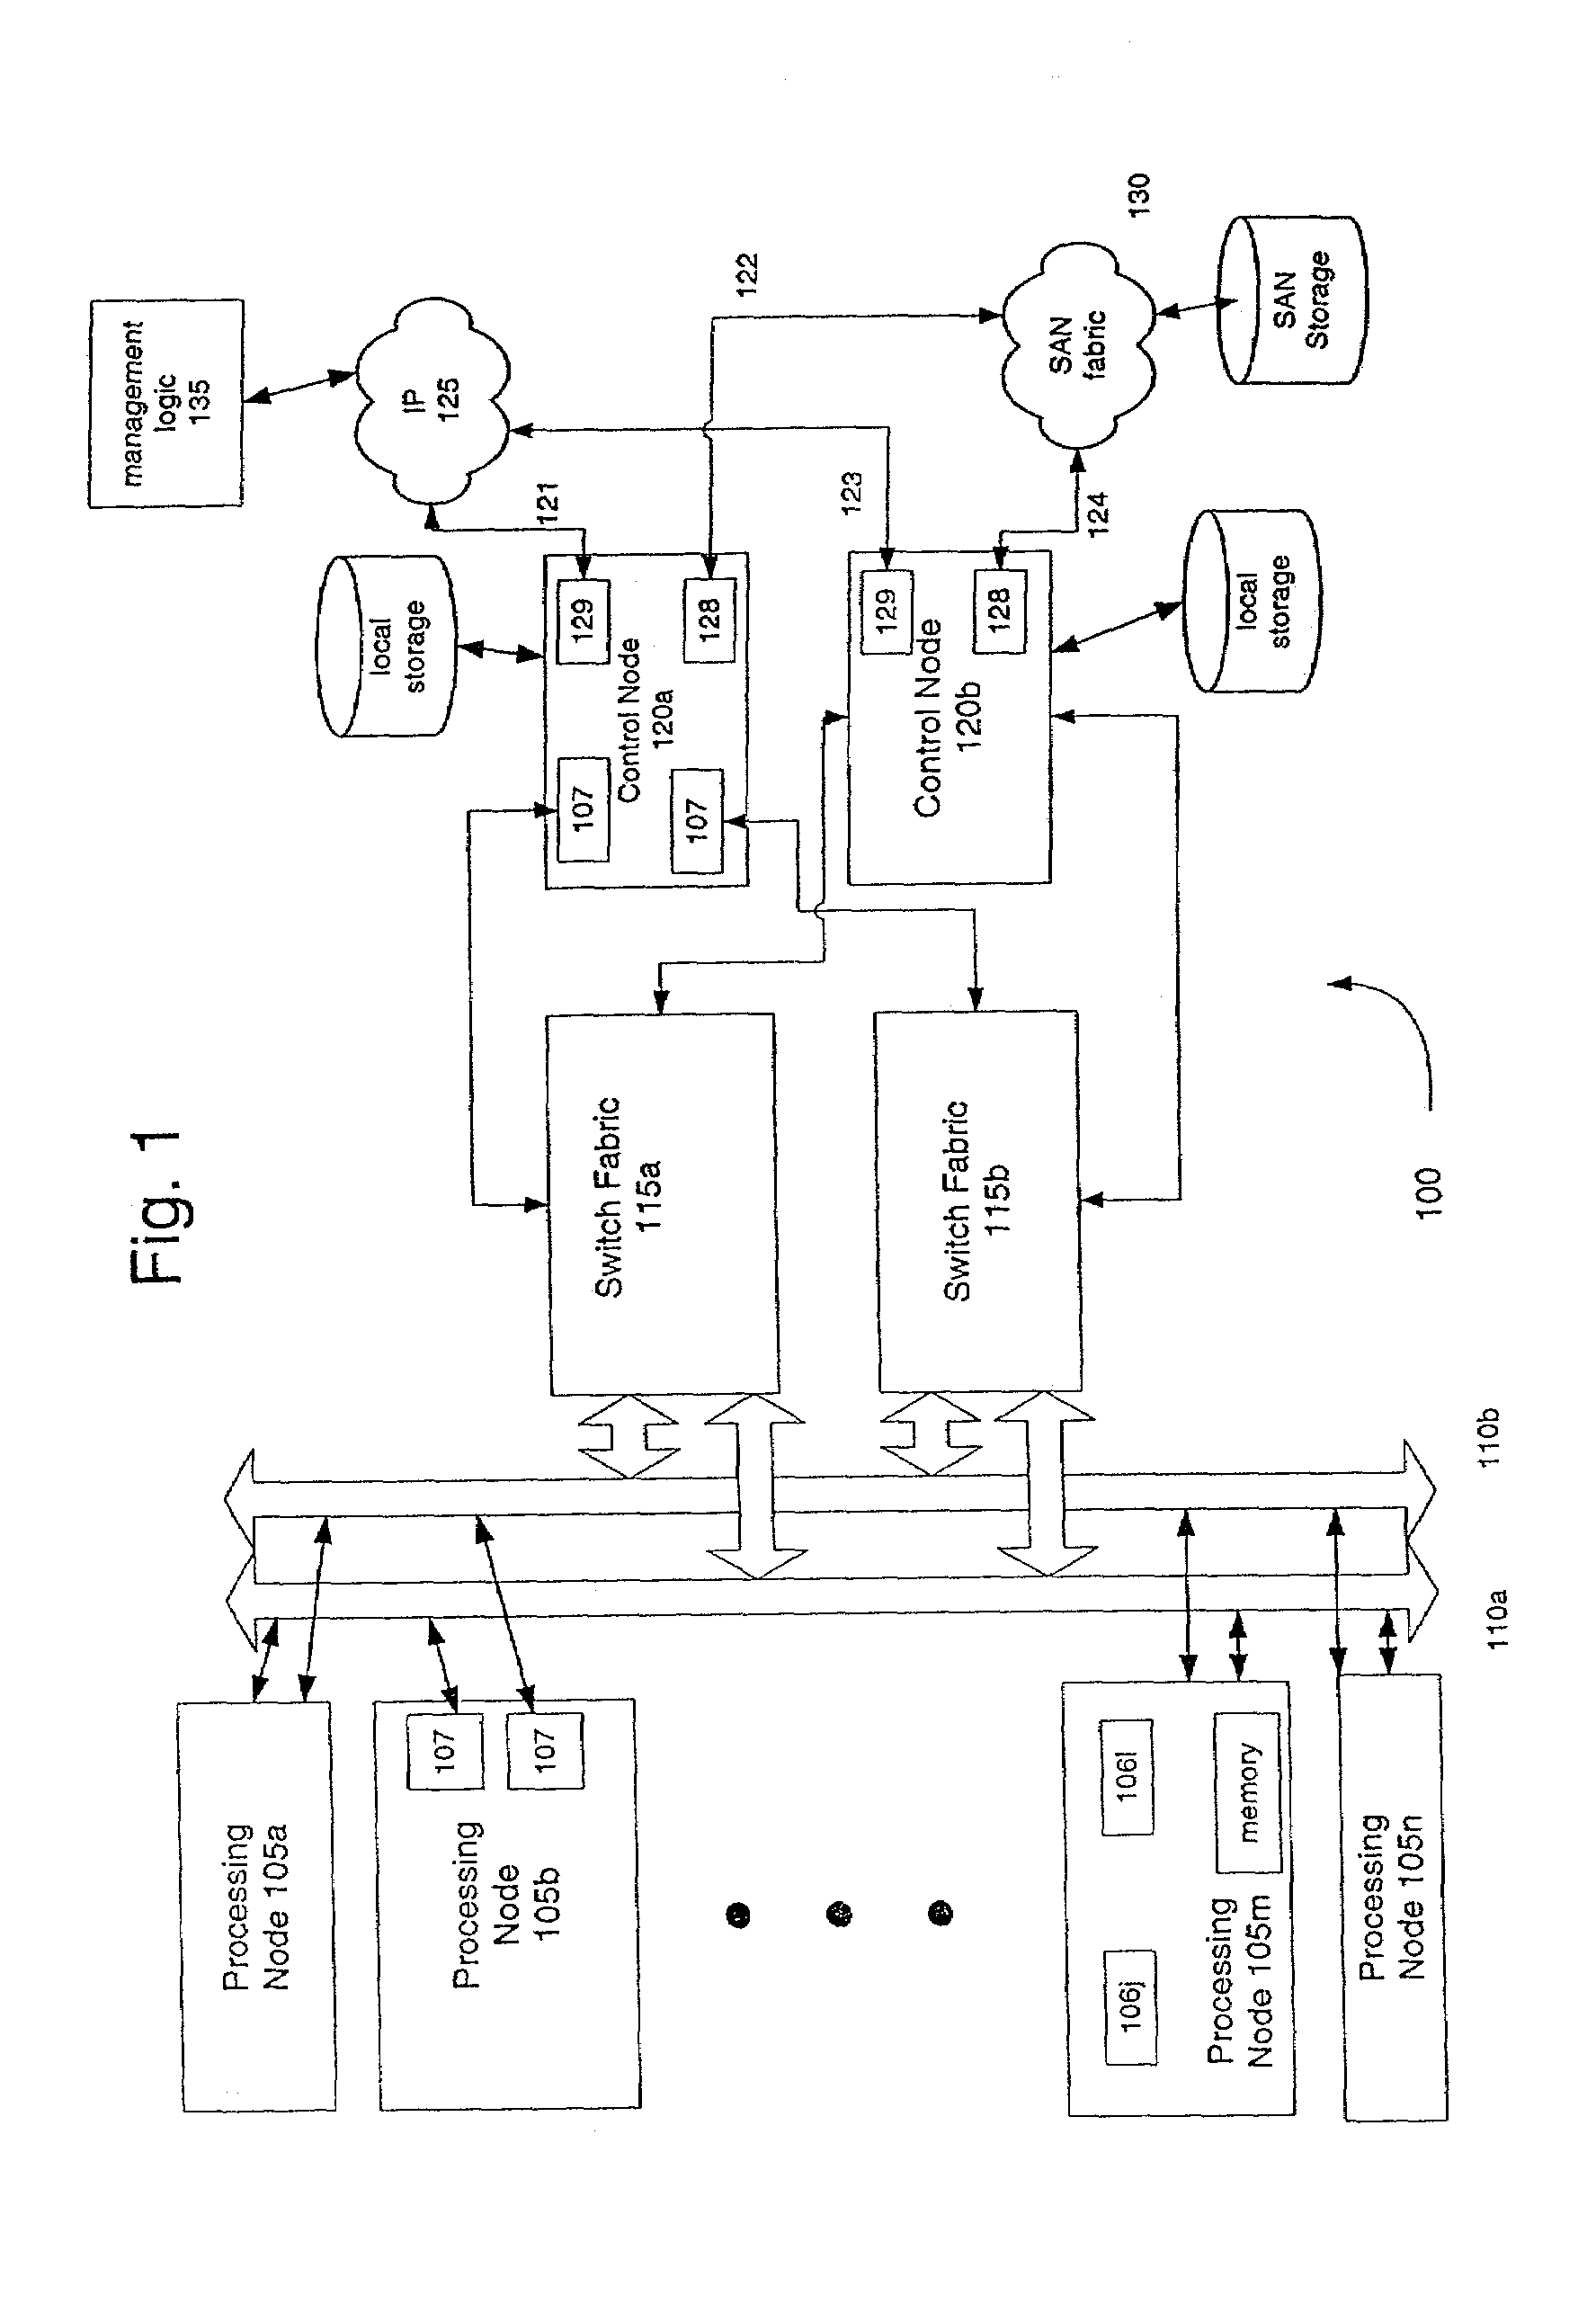 Address resolution protocol system and method in a virtual network